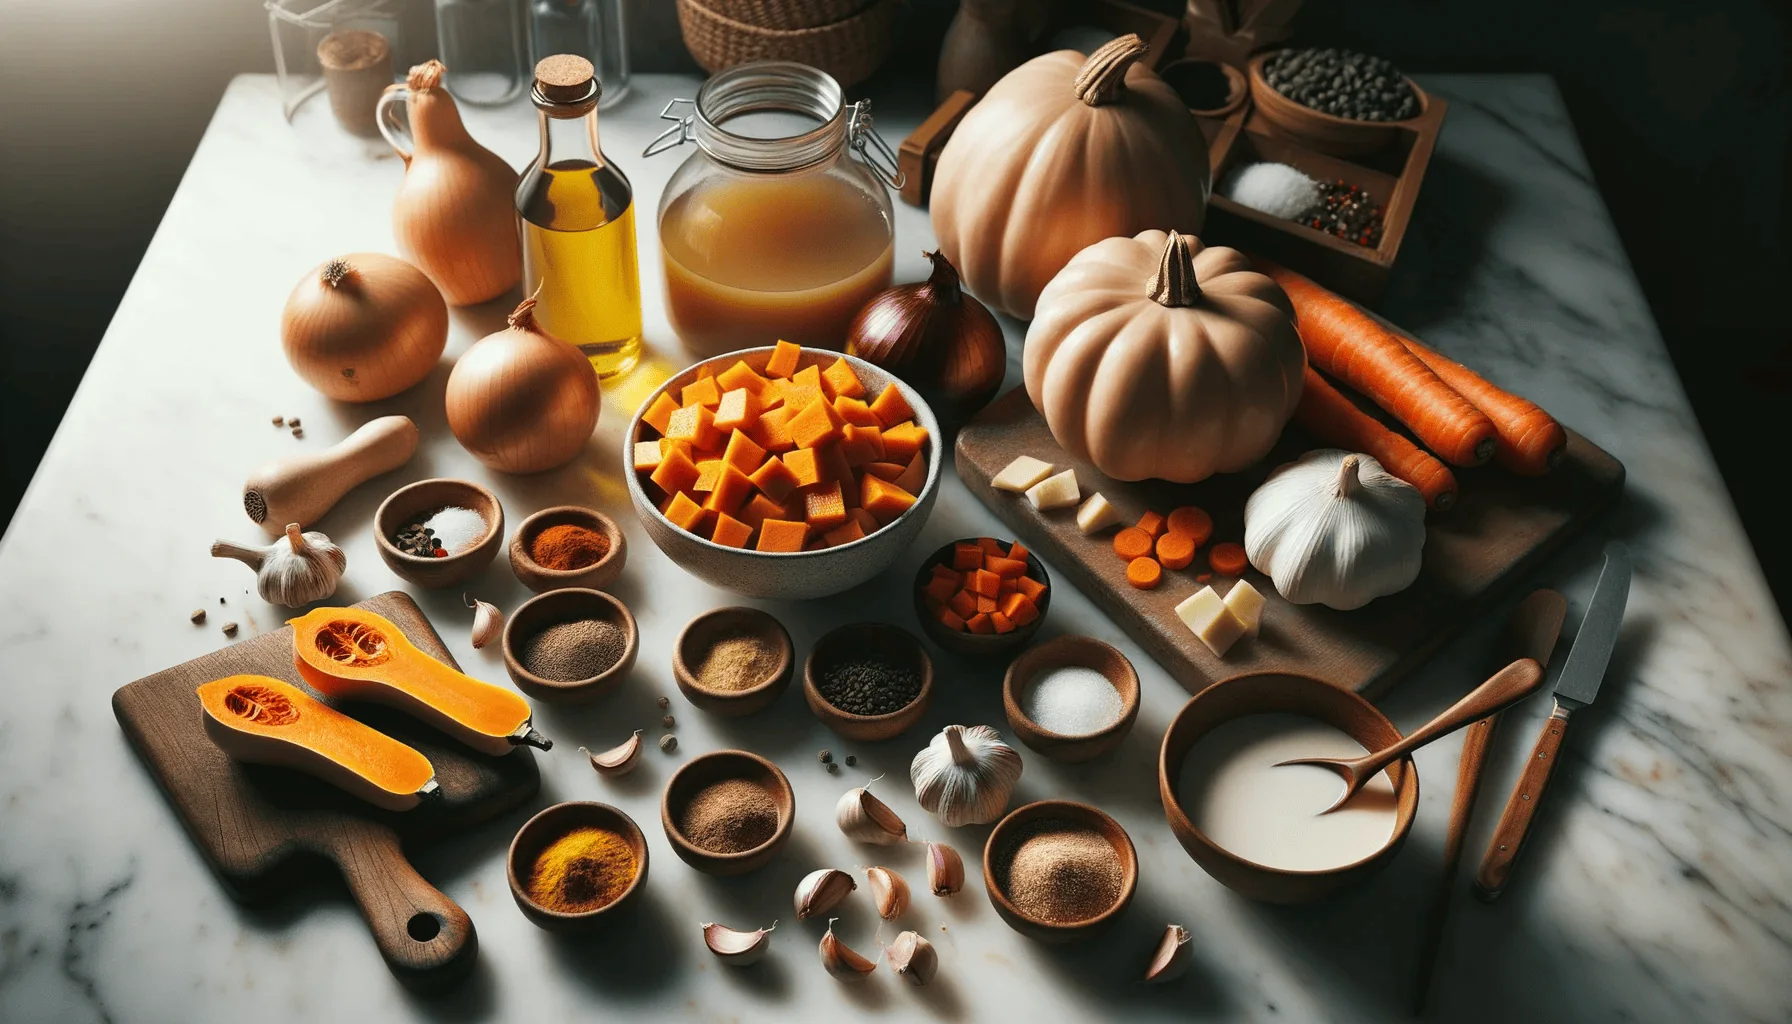 The ingredients for my Crock-Pot butternut squash soup recipe